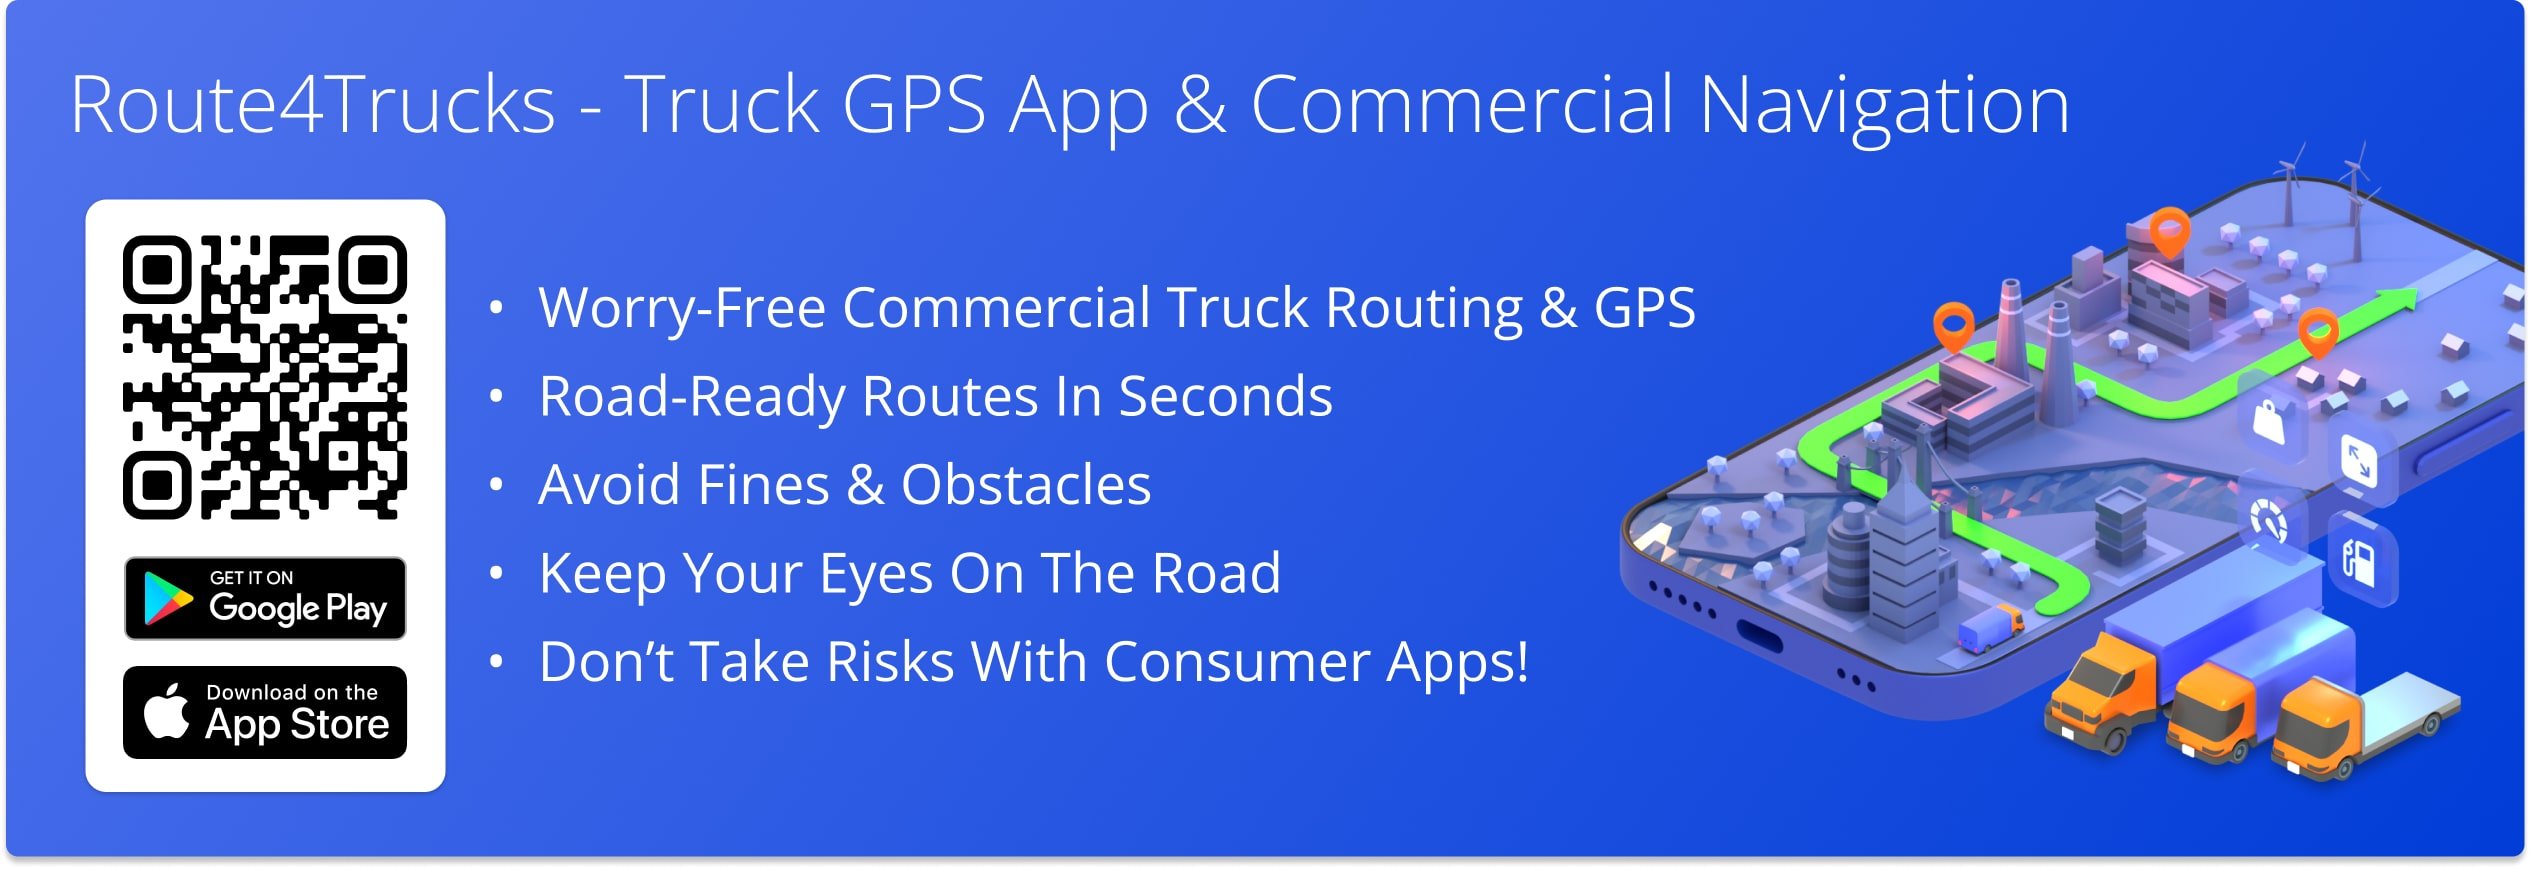 Route4Trucks - best truck routing and multi-stop route planner app with in-app GPS truck navigation for truckers and commercial vehicles.